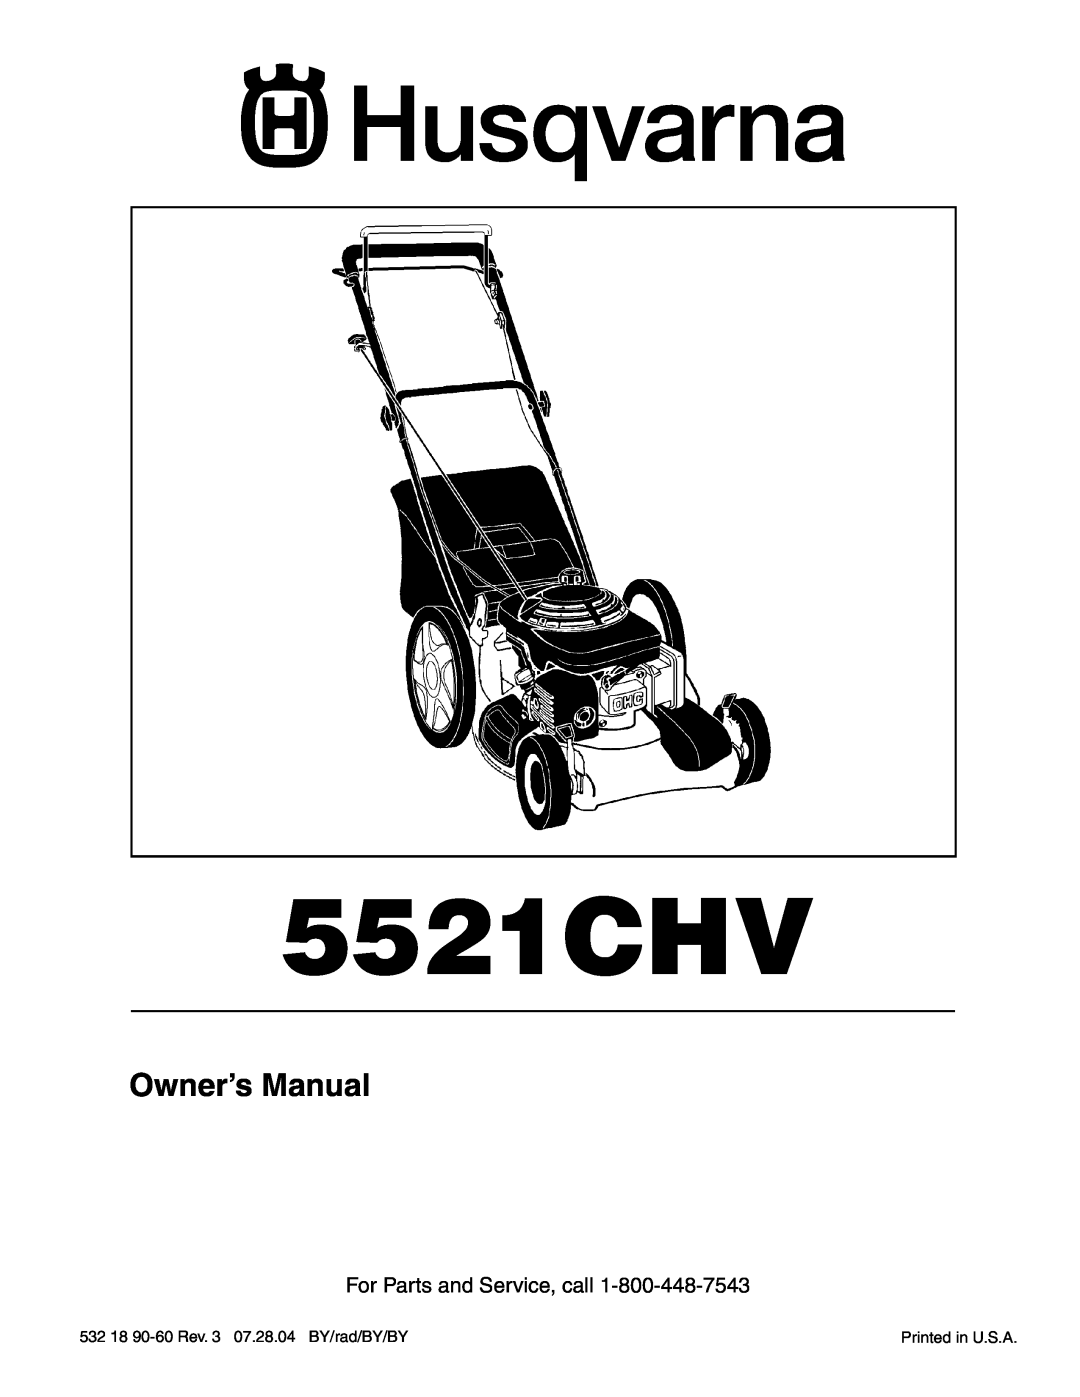 Husqvarna 5521CHV owner manual For Parts and Service, call 